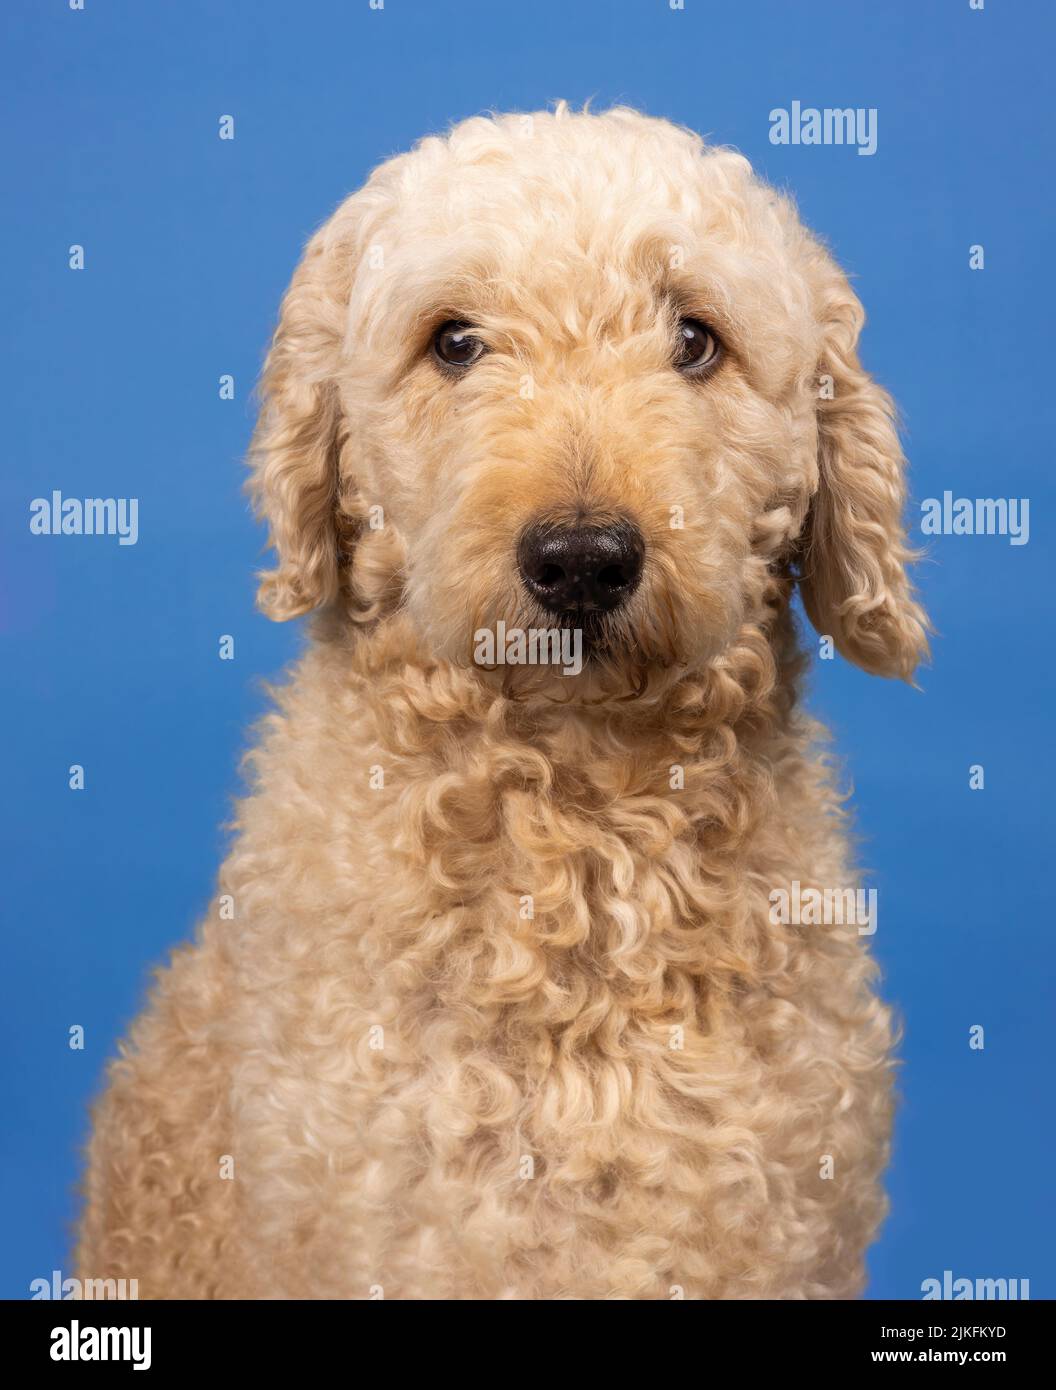 A beautiful beige Labradoodle dog, photographed in a studio and looking towards the camera. Photographed against a plain blue background Stock Photo